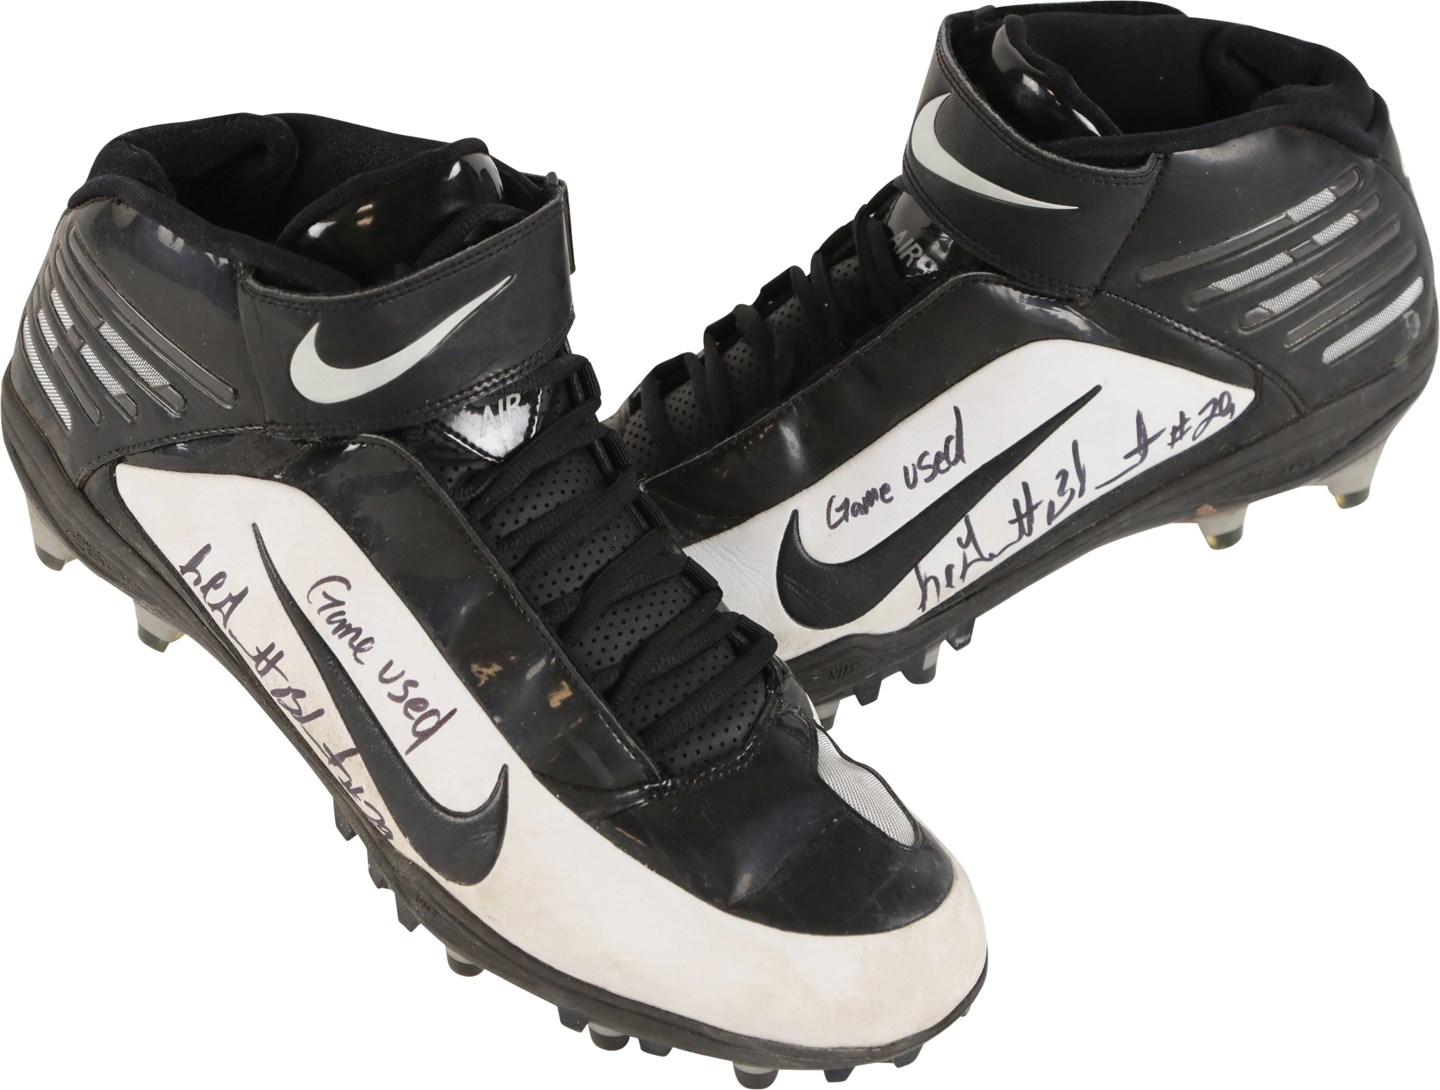 Football - 2013 LeGarrette Blount New England Patriots Signed Game Worn Cleats (Player Sourced & JSA)